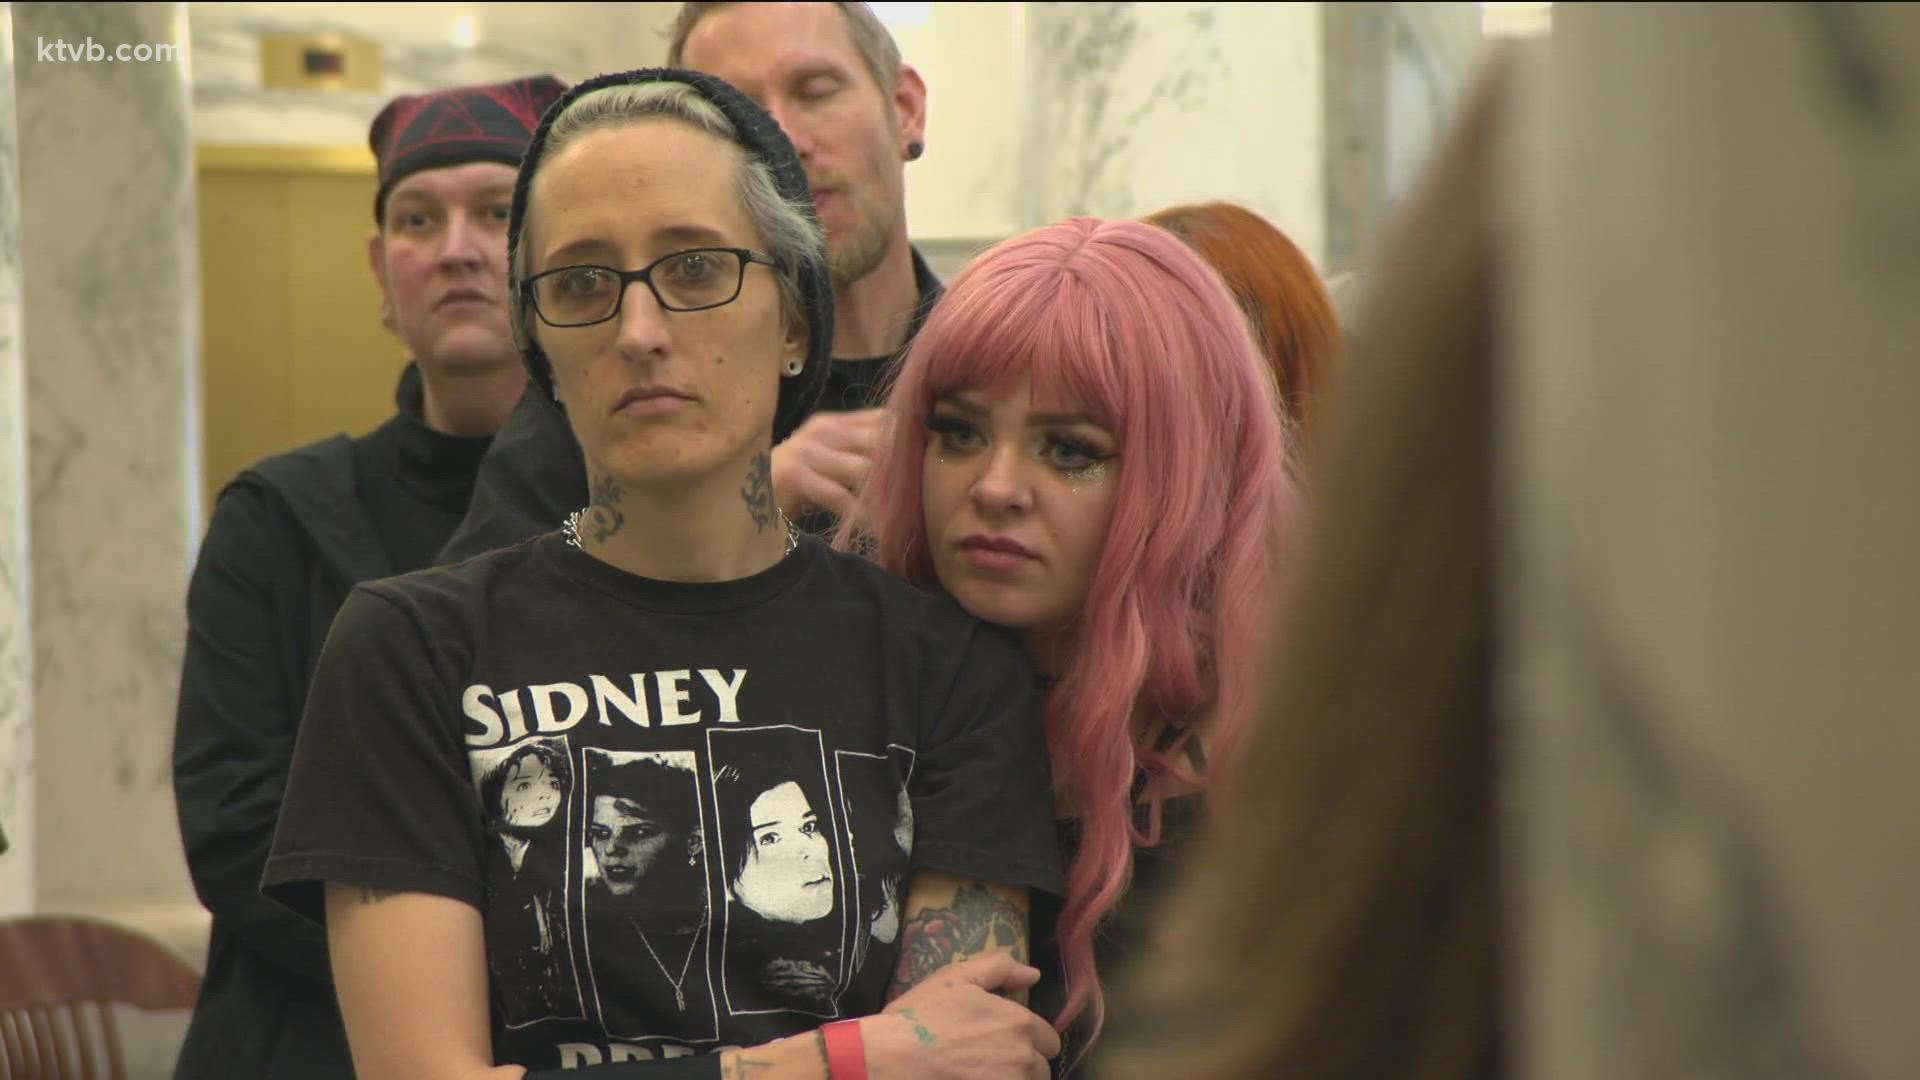 Christians and Satanists alike were present at the State Capitol for the National Day of Prayer.